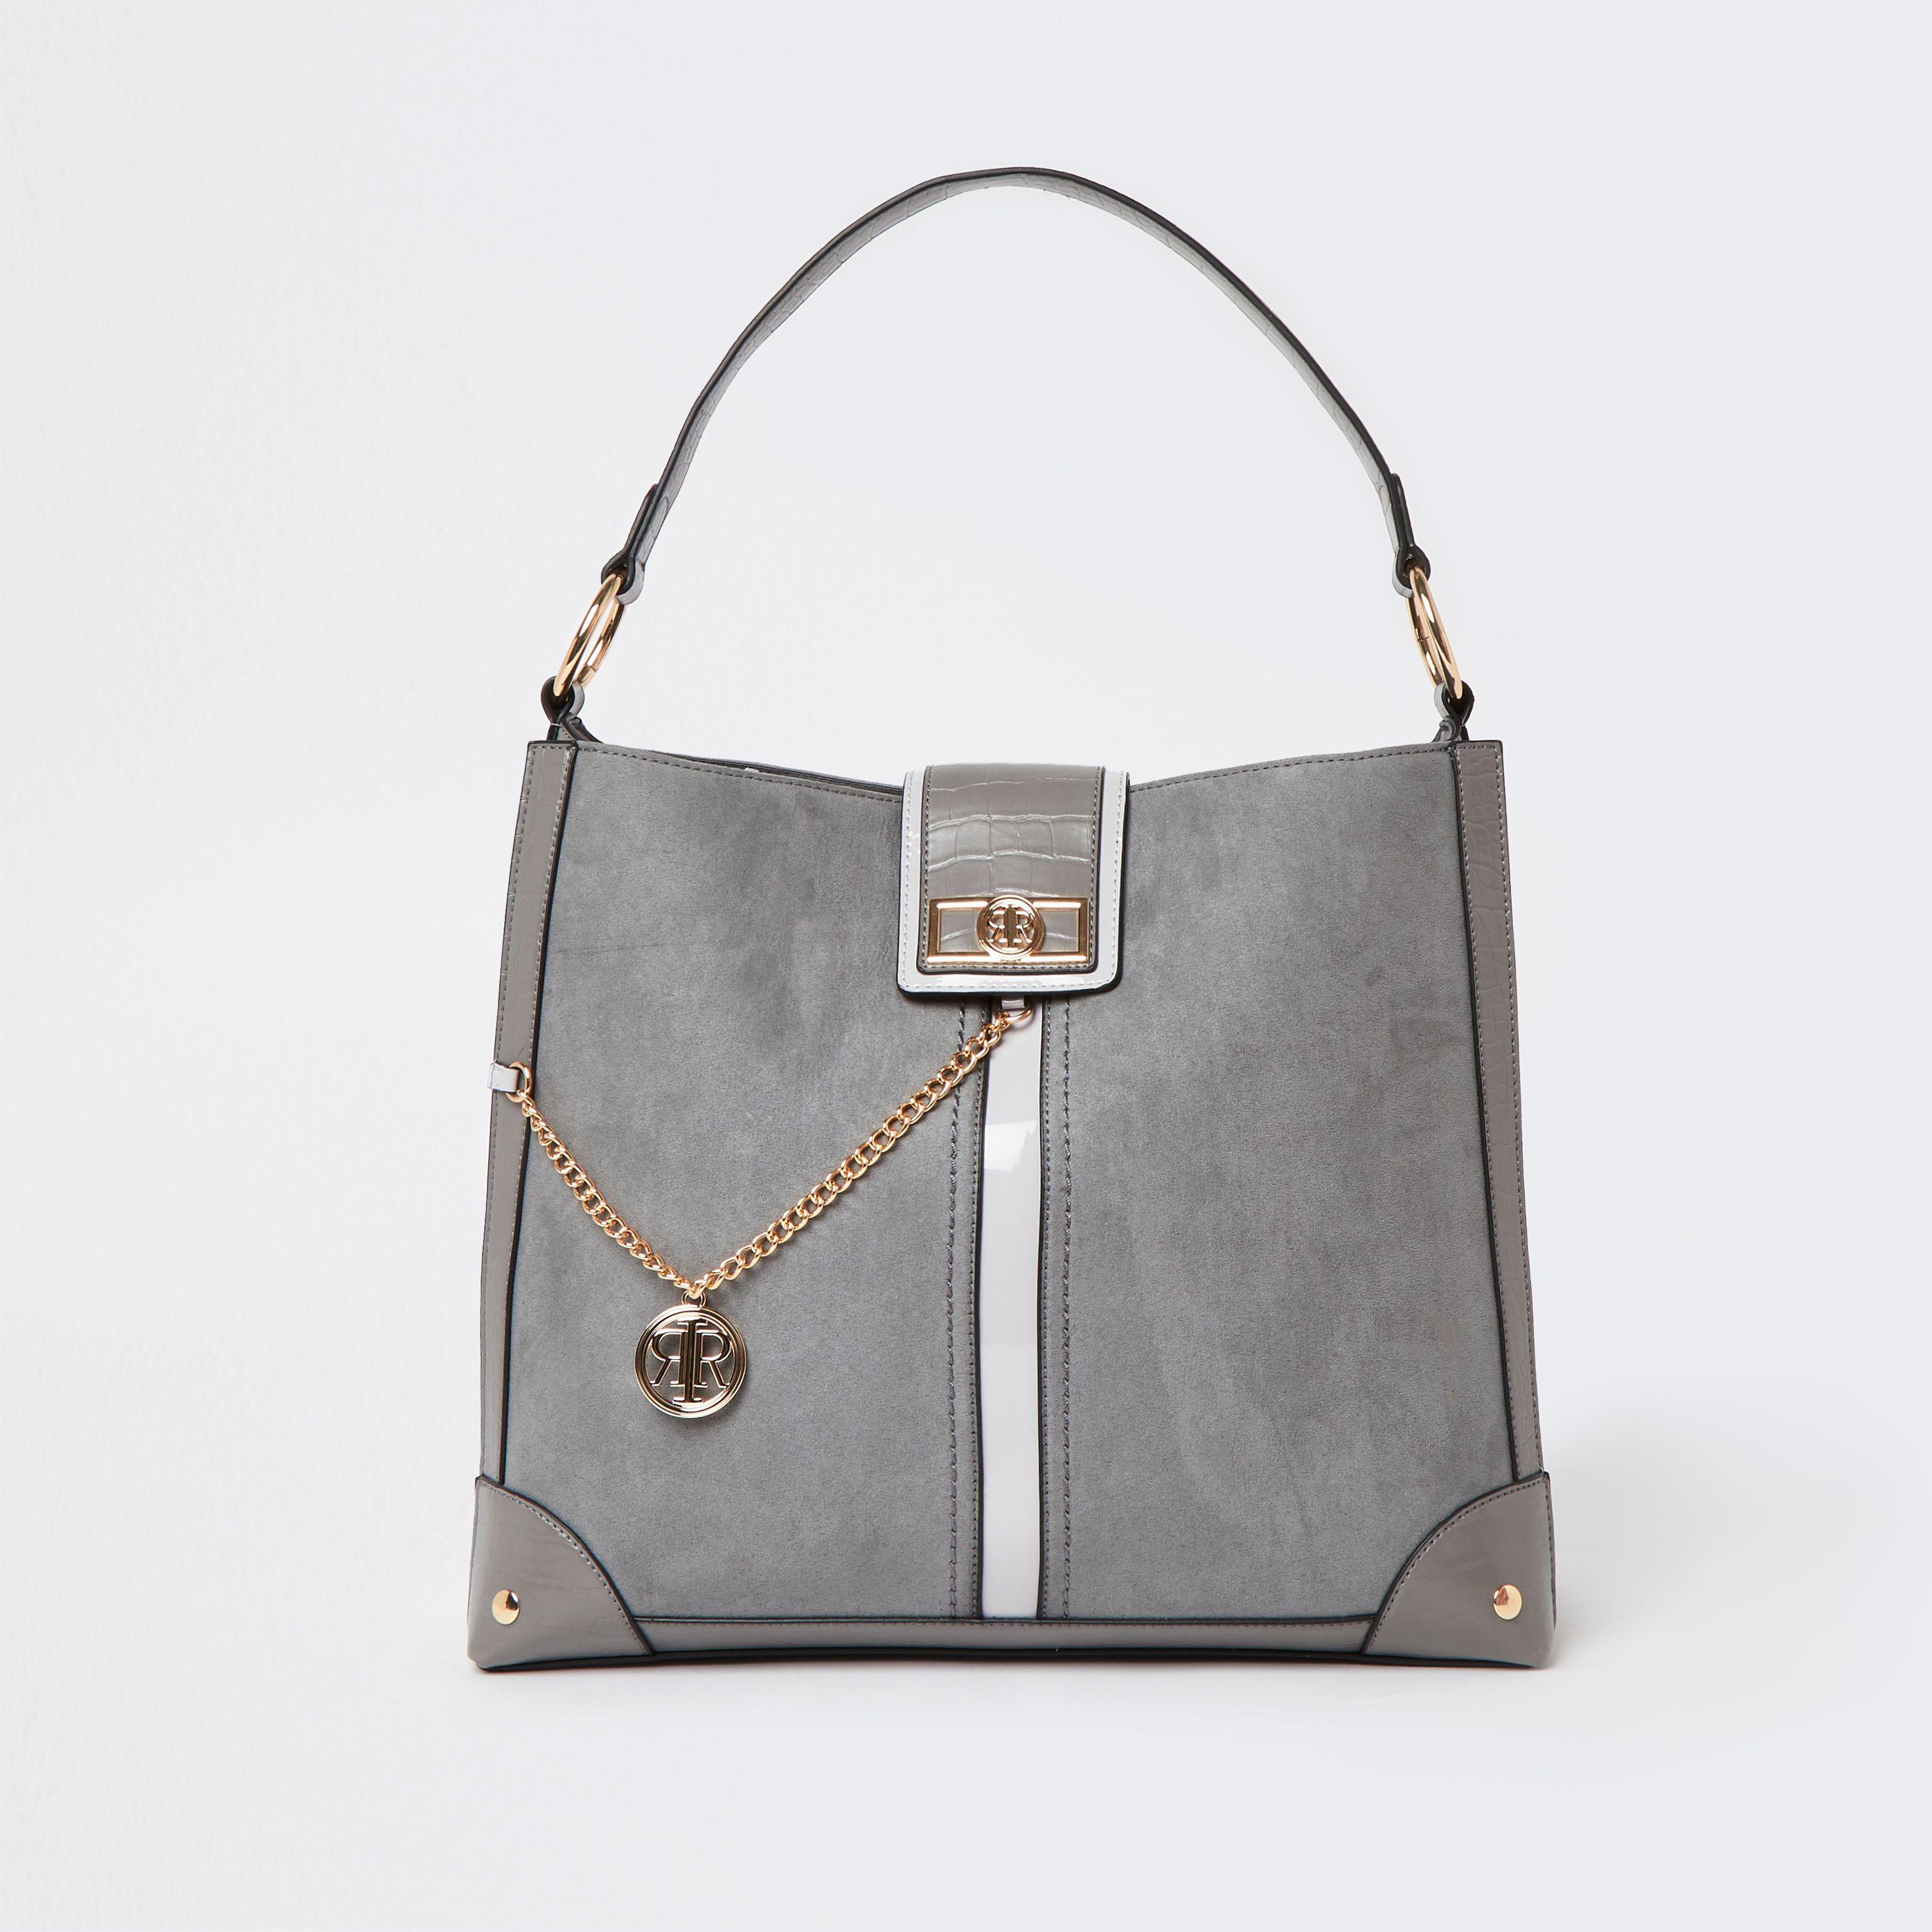 River Island Grey Bag: A Versatile Accessory for Everyday Chic